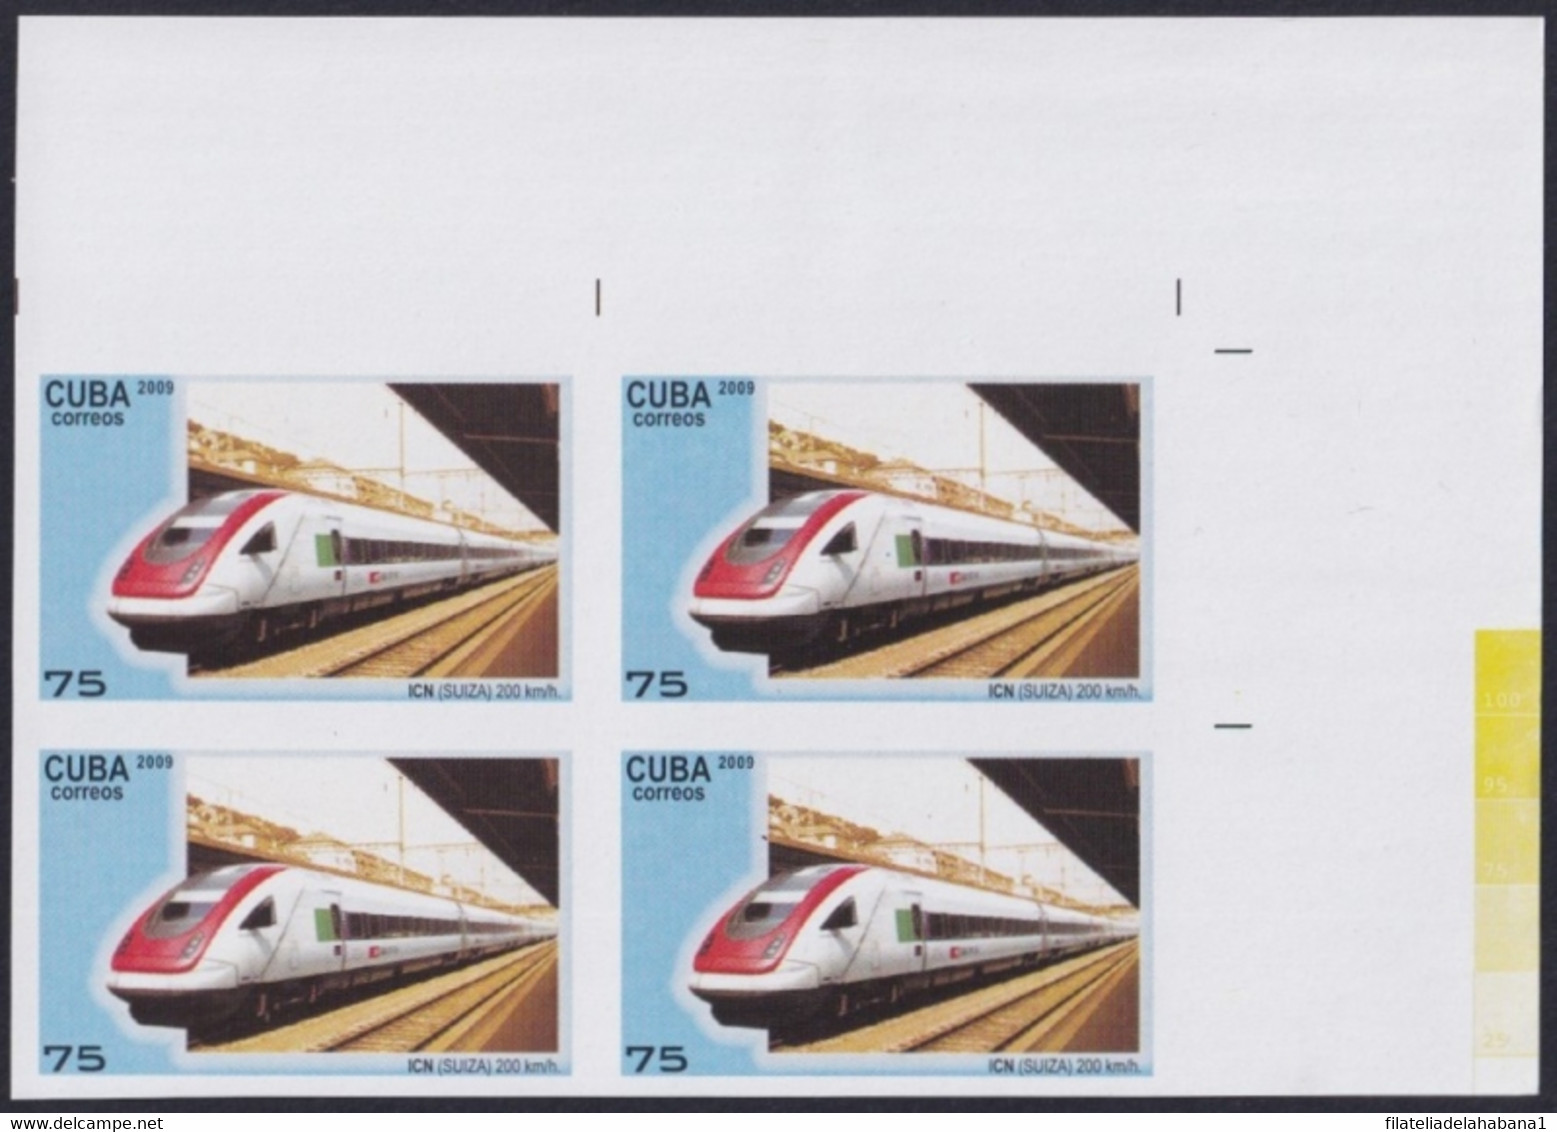 2009.441 CUBA 2009 75c MNH IMPERFORATED PROOF FAST RAILROAD SWITZERLAND ICN. - Imperforates, Proofs & Errors